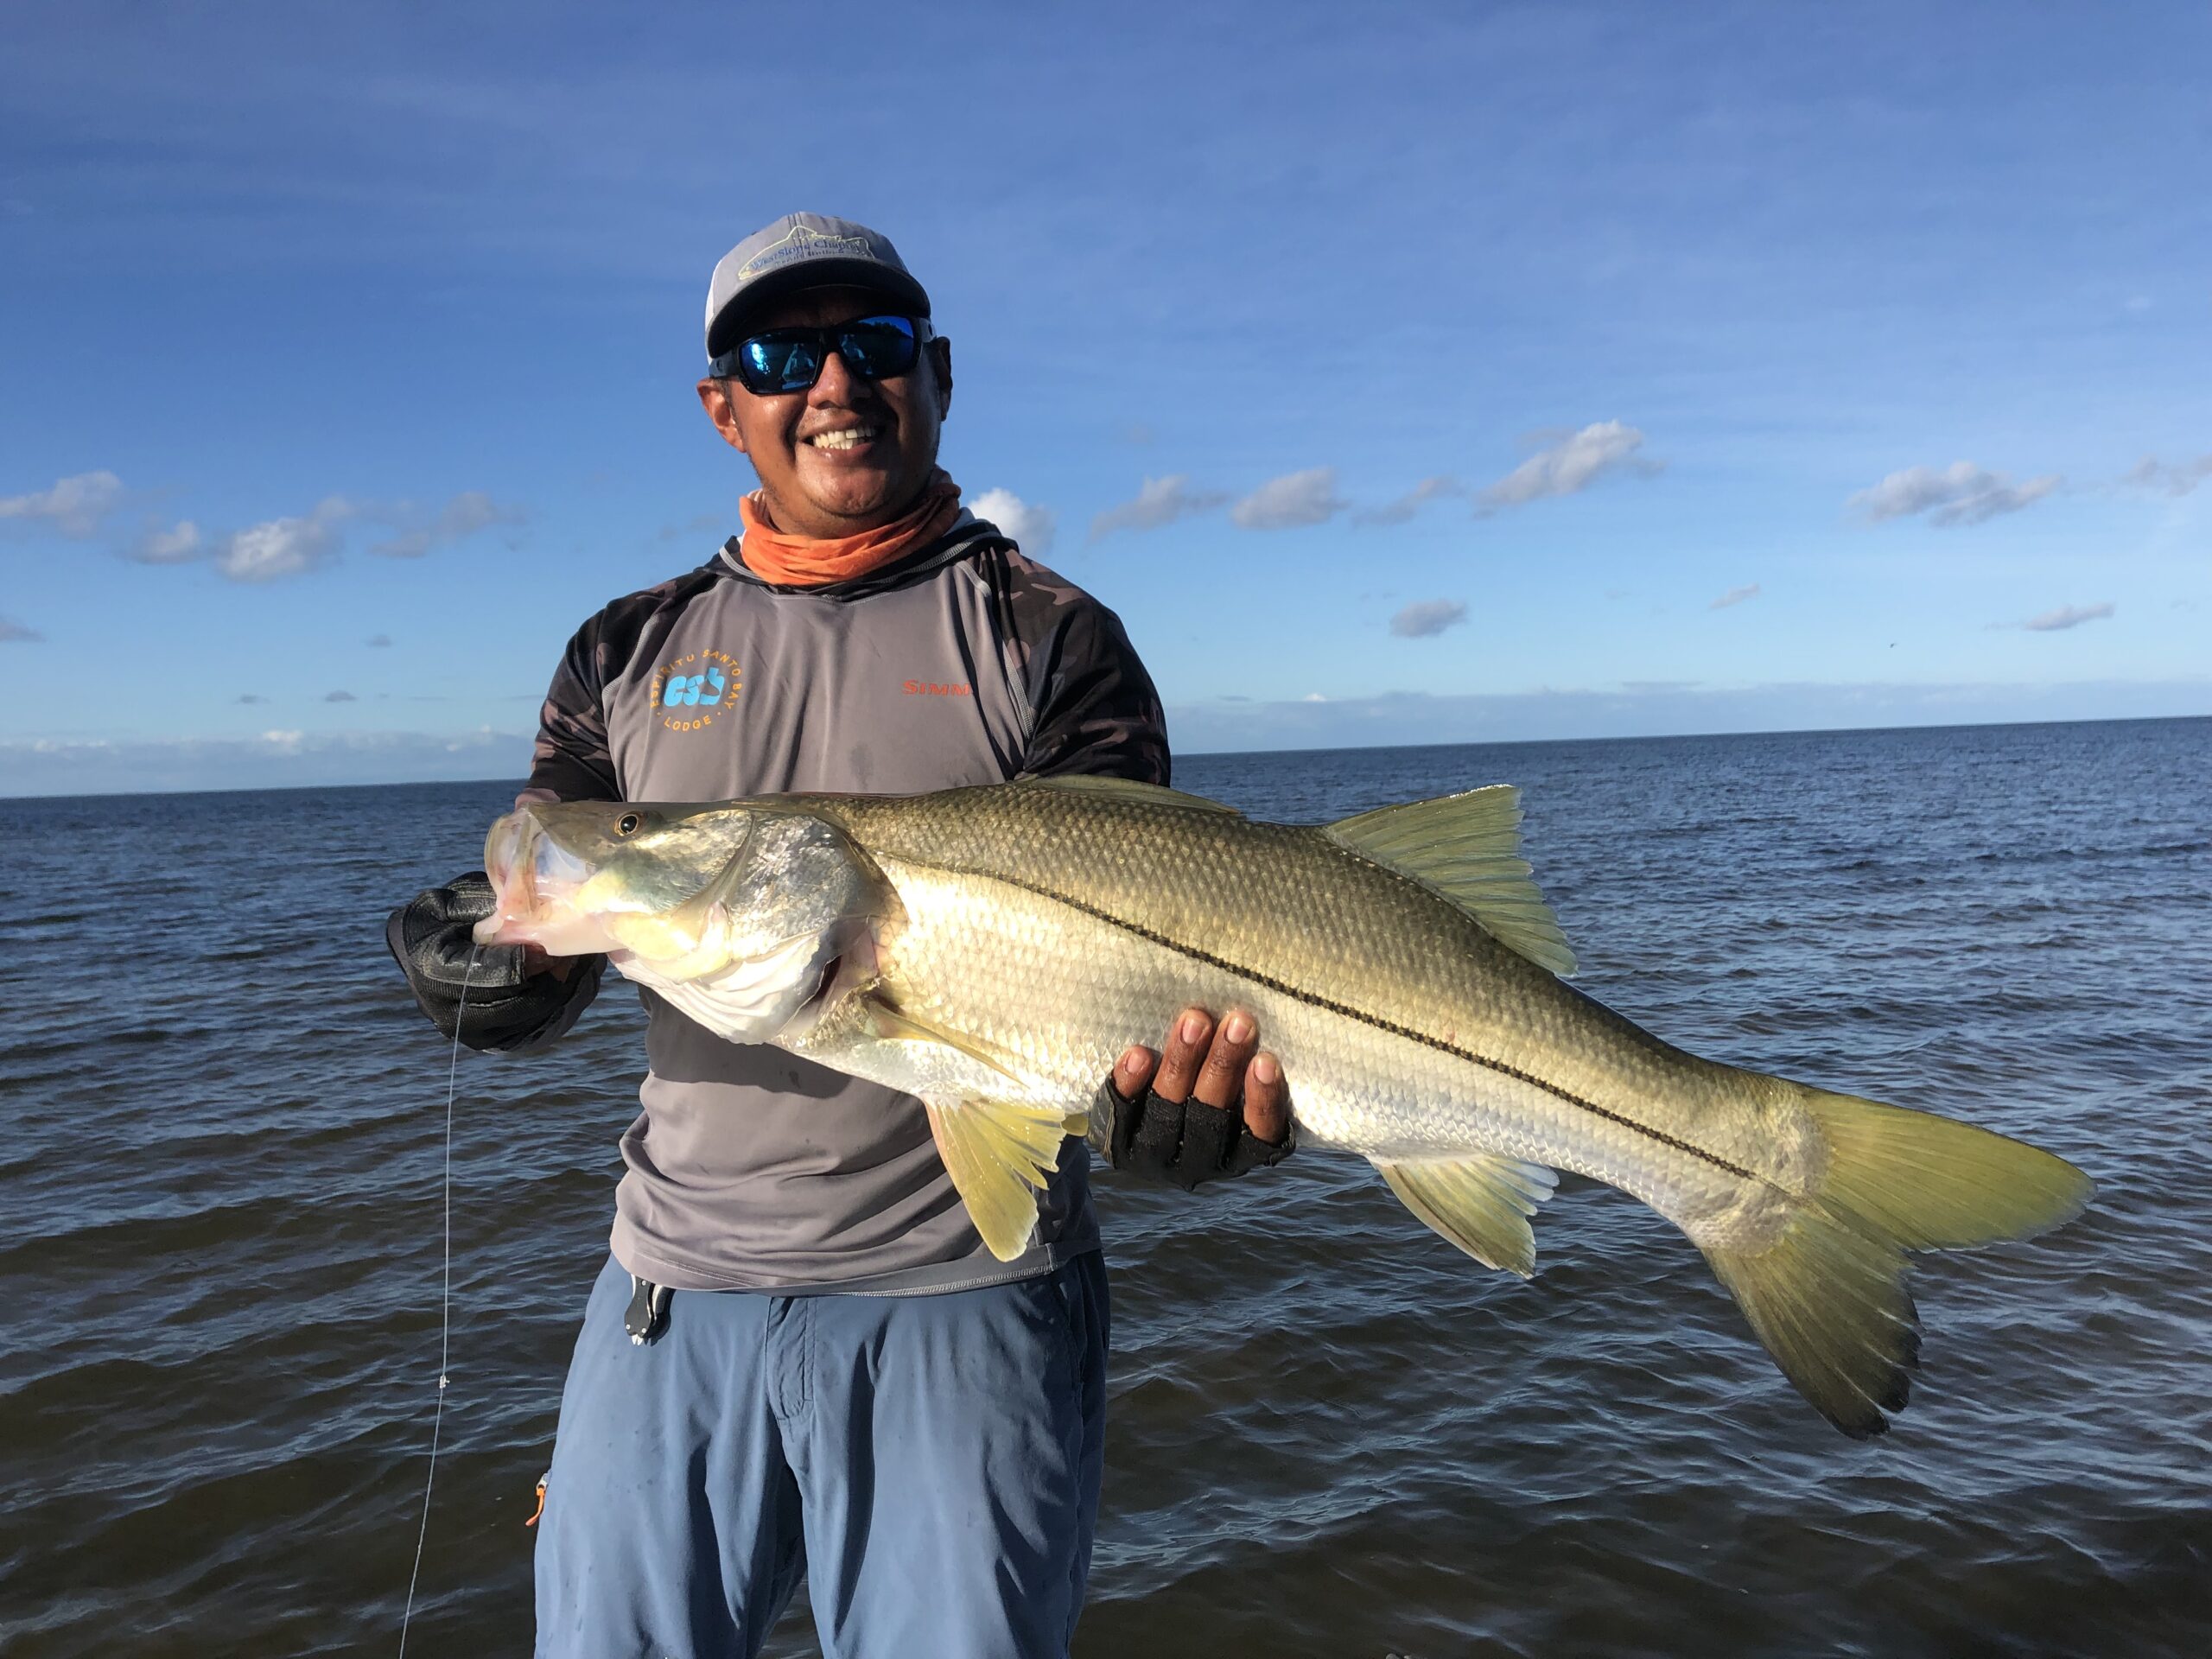 ESB GUIDE WITH SNOOK